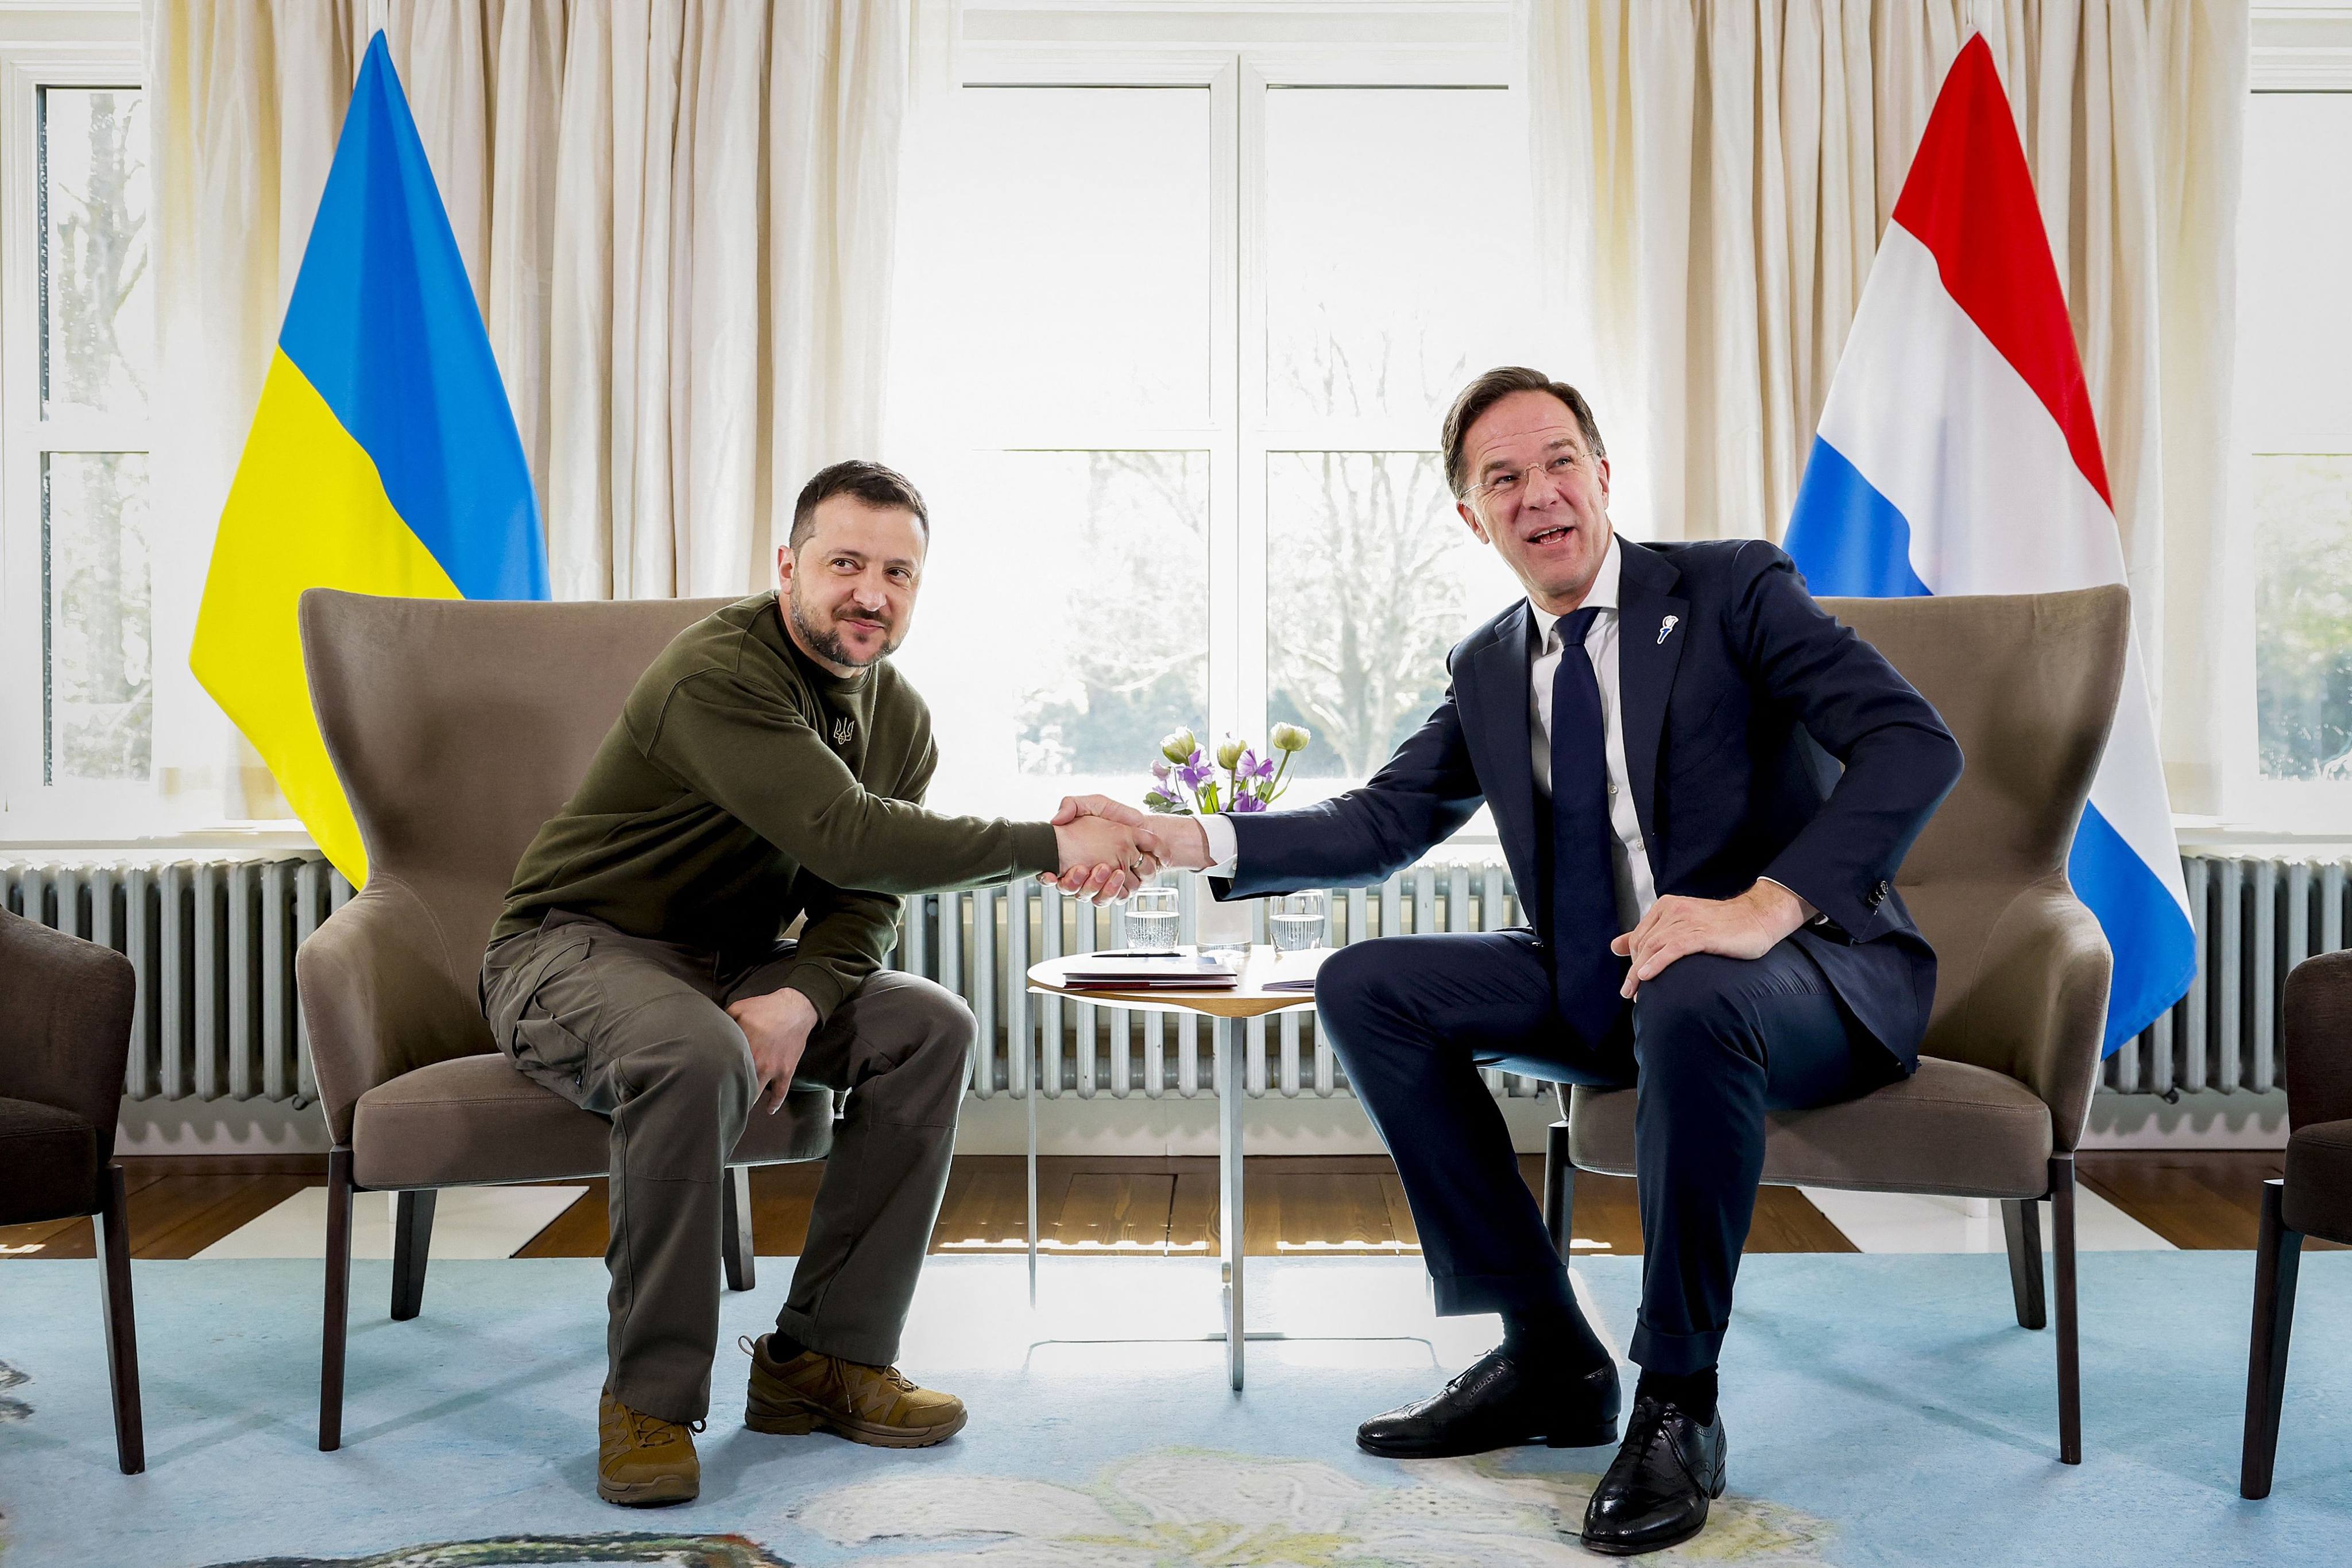 Ukrainian President Volodymyr Zelensky shakes hands with Dutch Prime Minister Mark Rutte on a first visit to the Netherlands. Photo: AFP